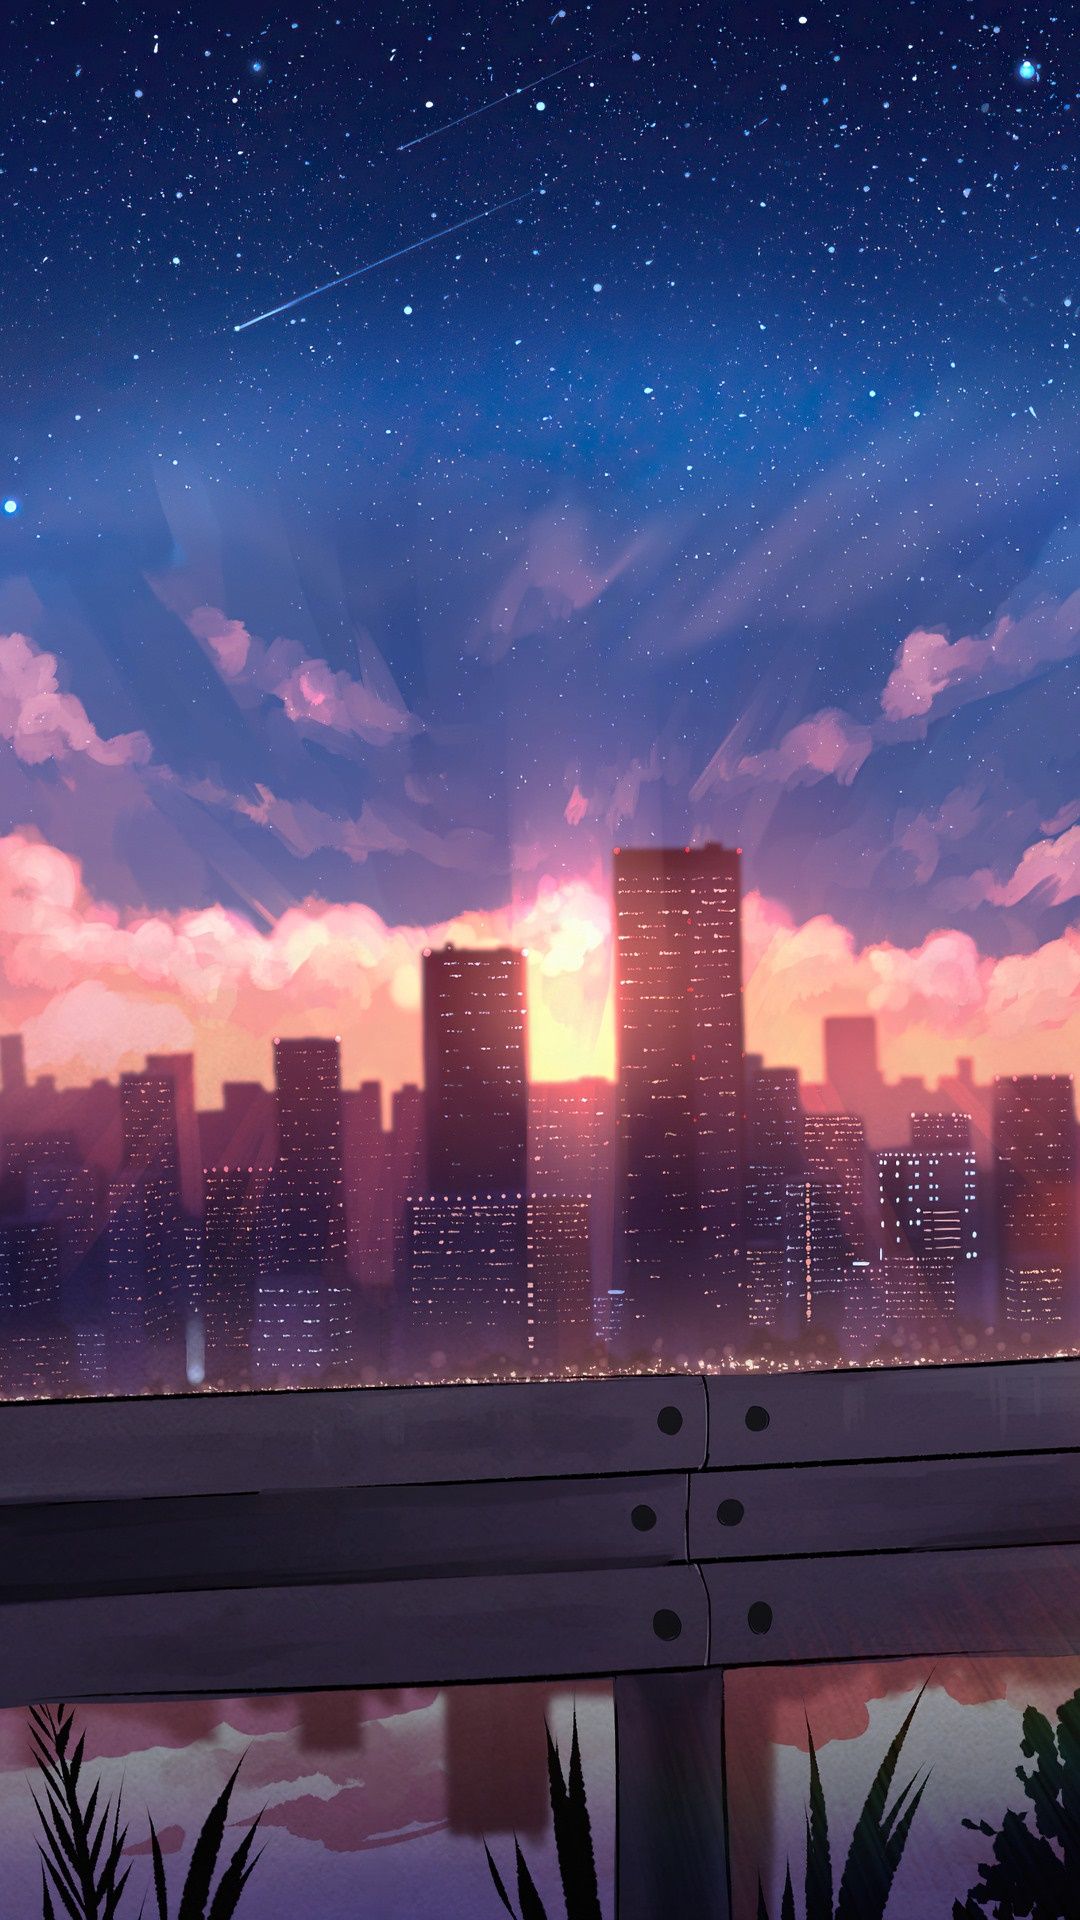 A city skyline at night with stars in the background - Anime city